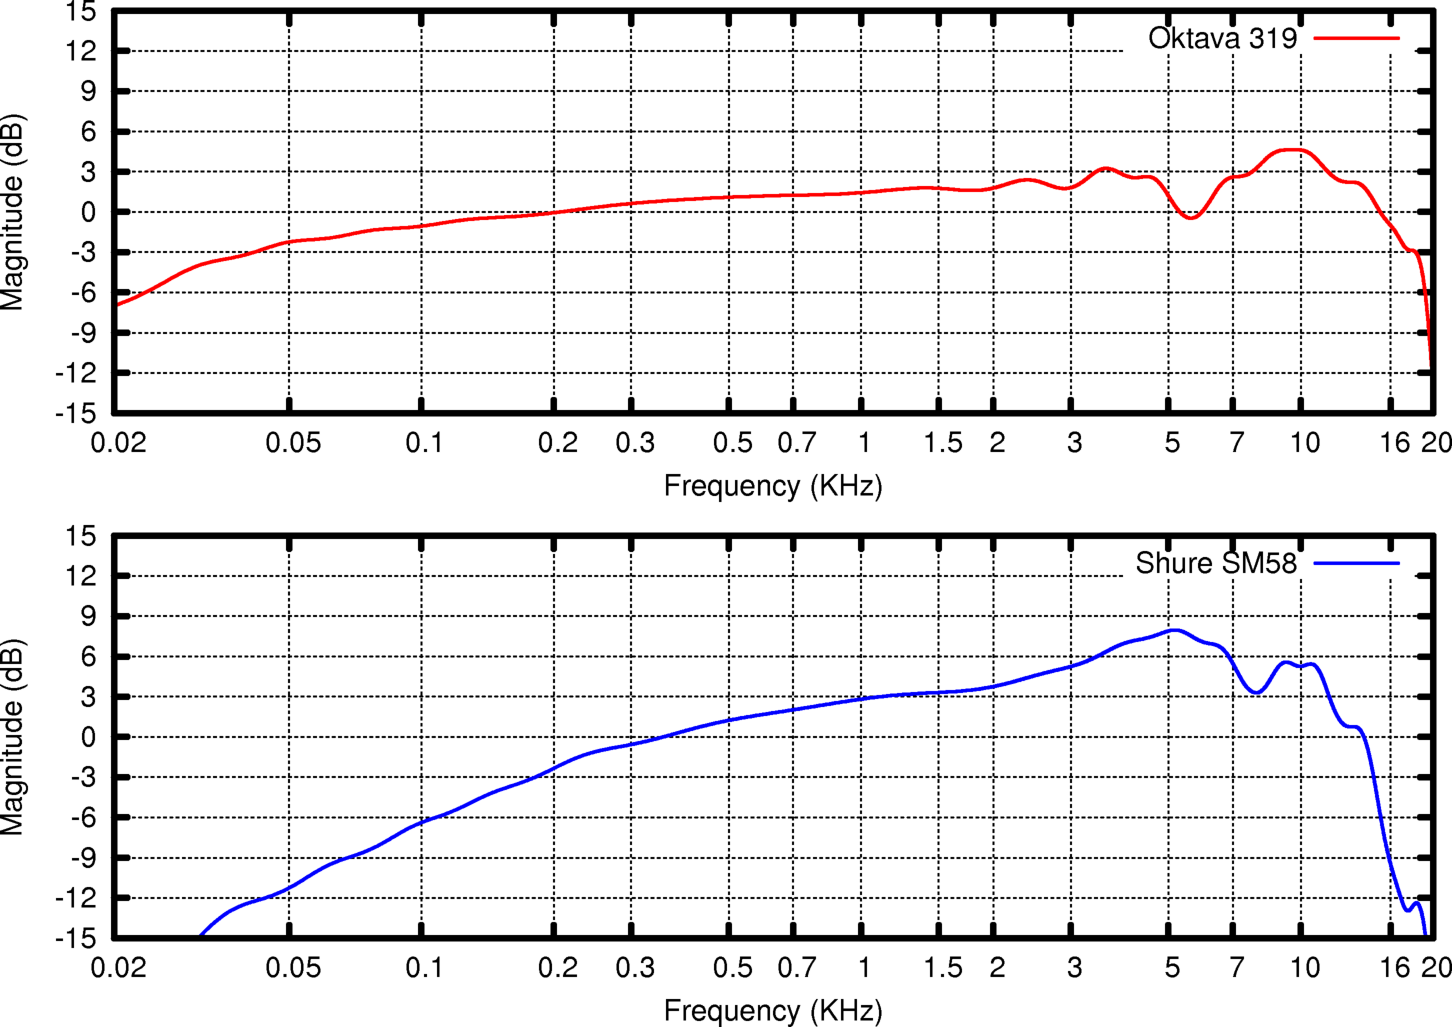 Microphone frequency response graph from Wikipedia